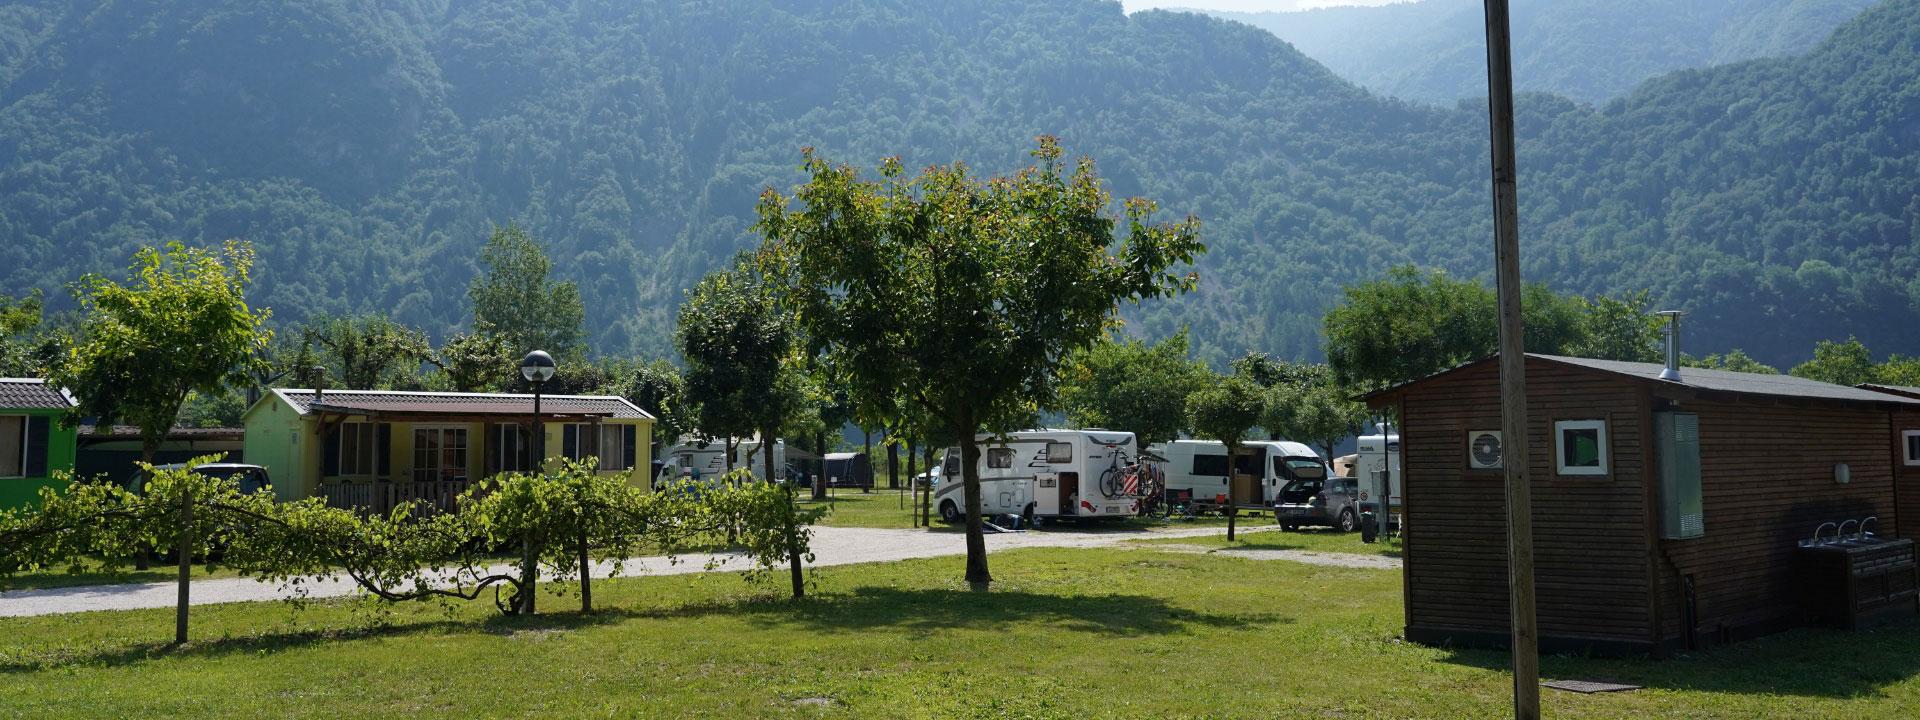 campinglago en june-offer-campsite-lake-corlo-with-pitches-overlooking-the-lake 005